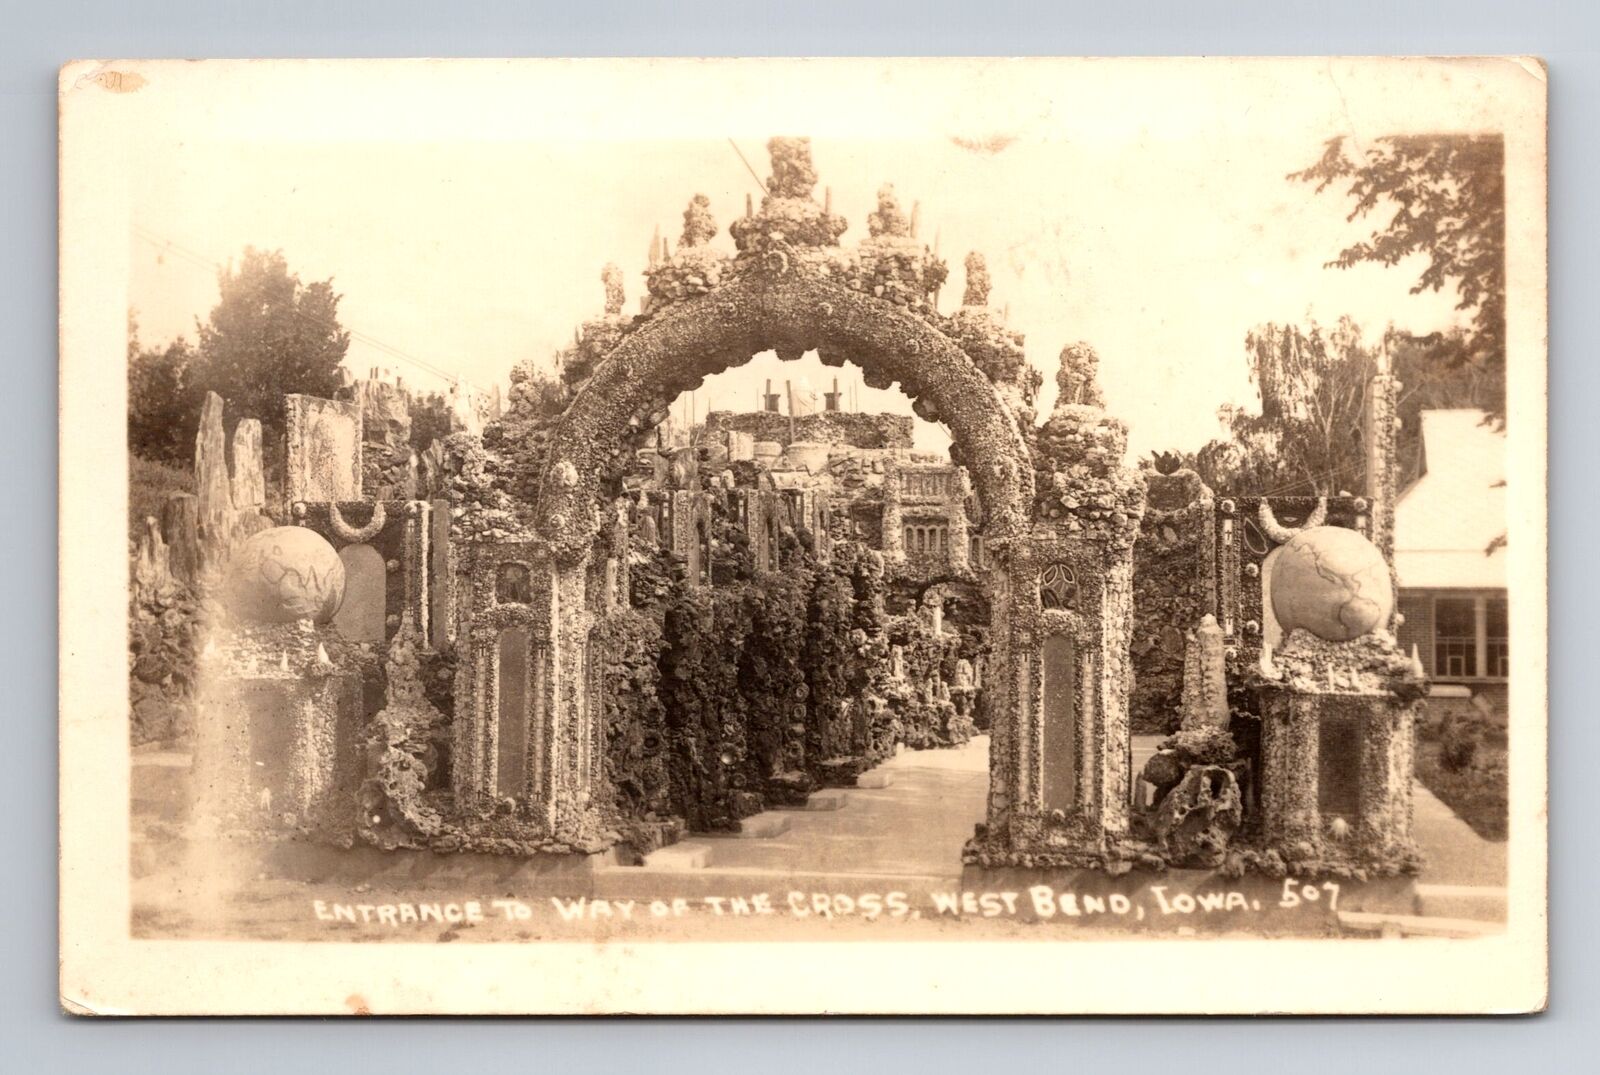 West Bend IA-Iowa RPPC, Entrance To Way Of The Cross, Antique, Vintage Postcard